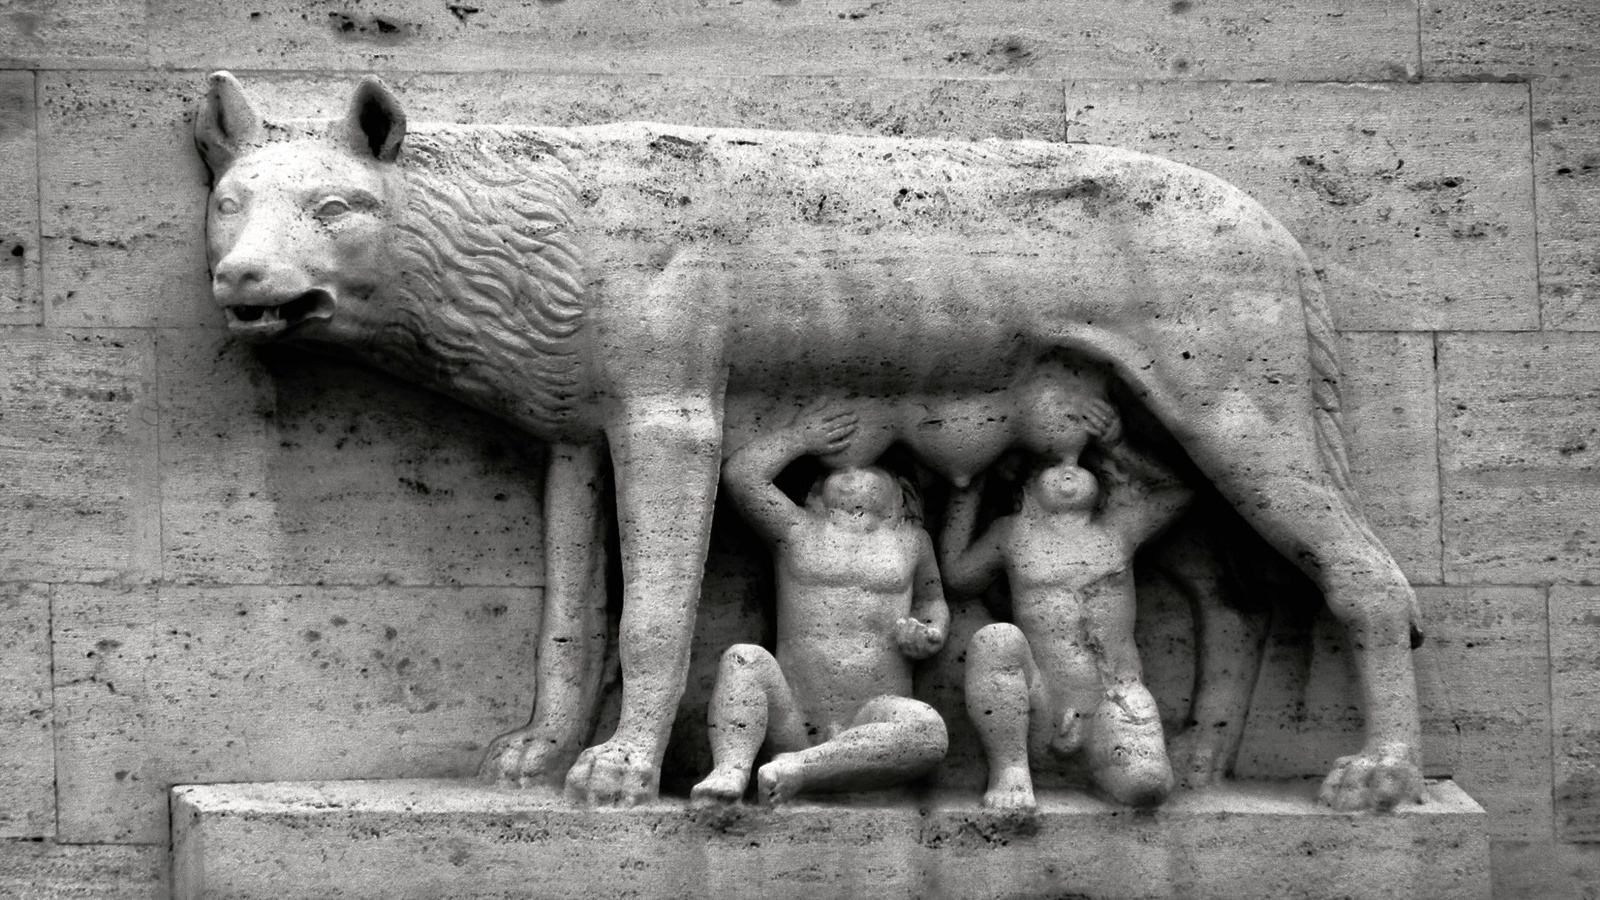 A statue depicting Romulus and Remus being nursed by a she-wolf.